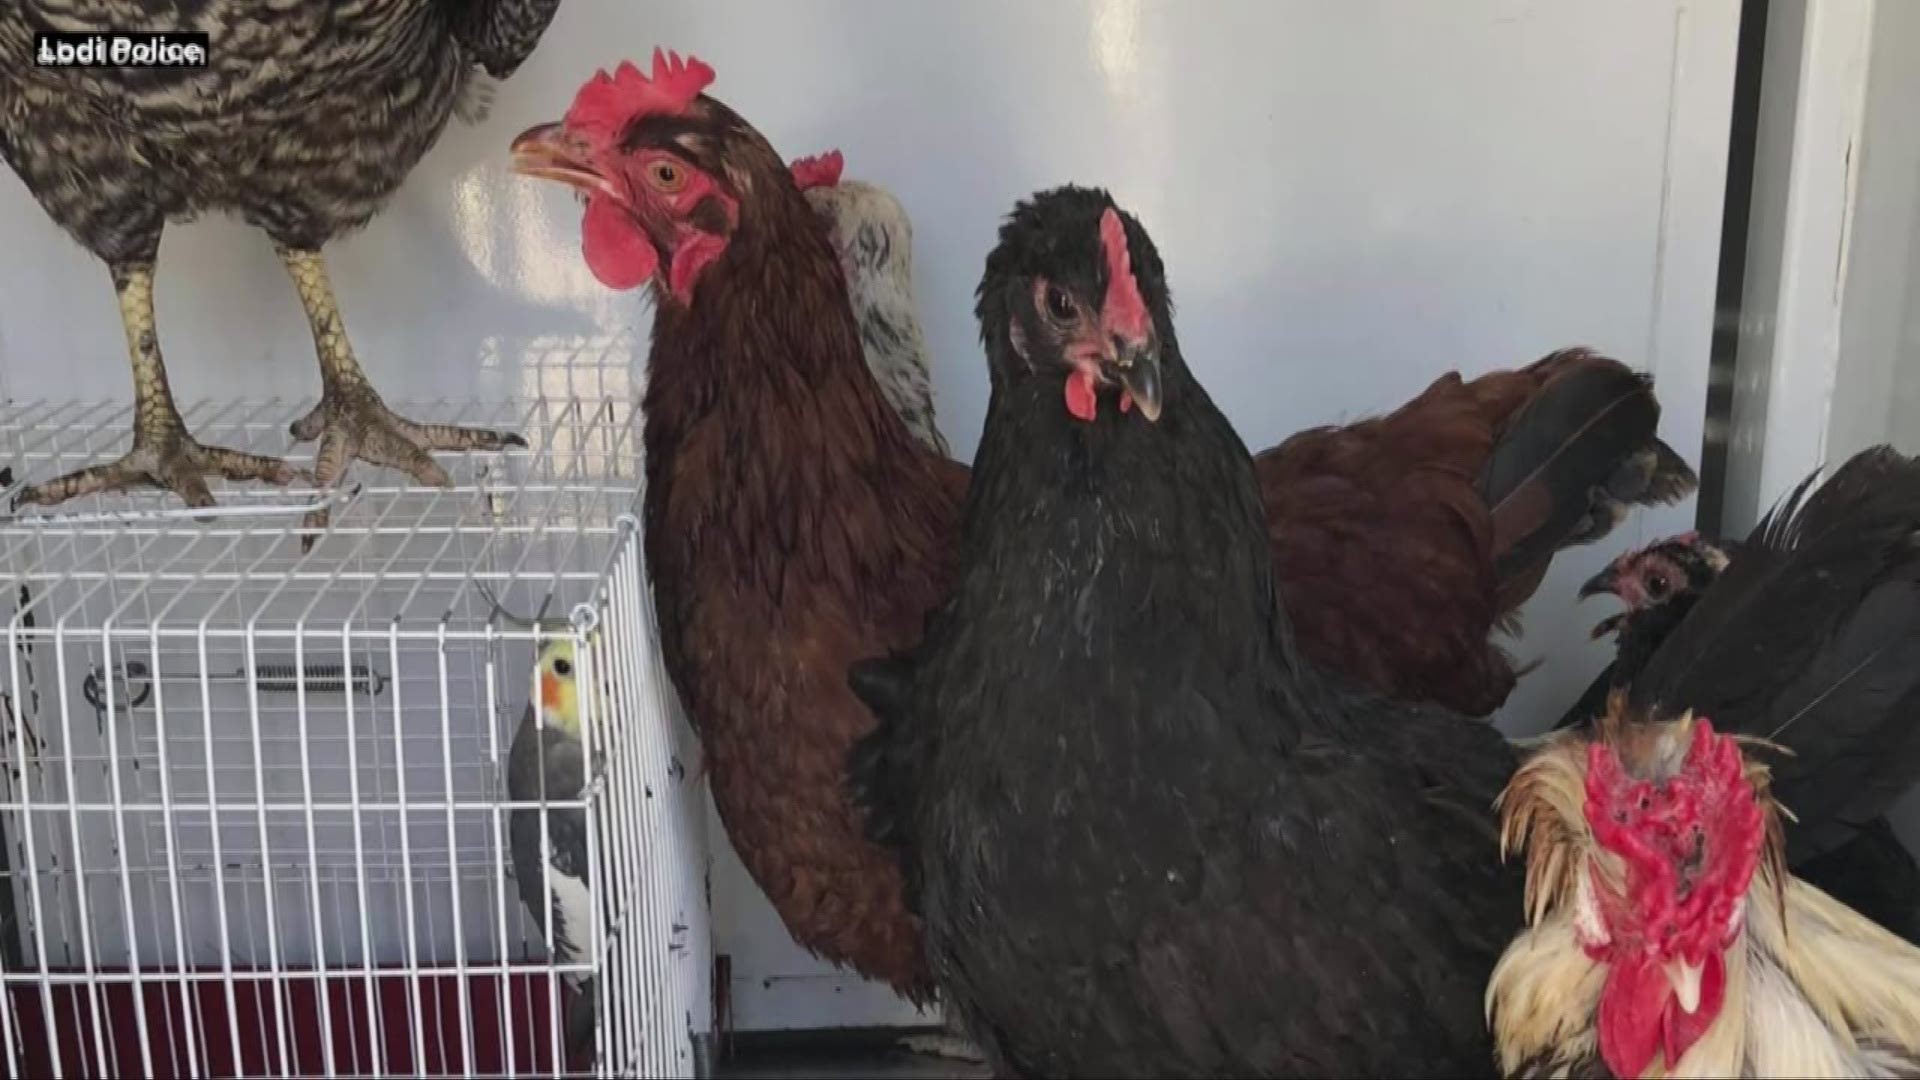 Dozens of animals were rescued from the home, animal services said. The owner of the home was arrested on multiple counts of felony animal abuse.